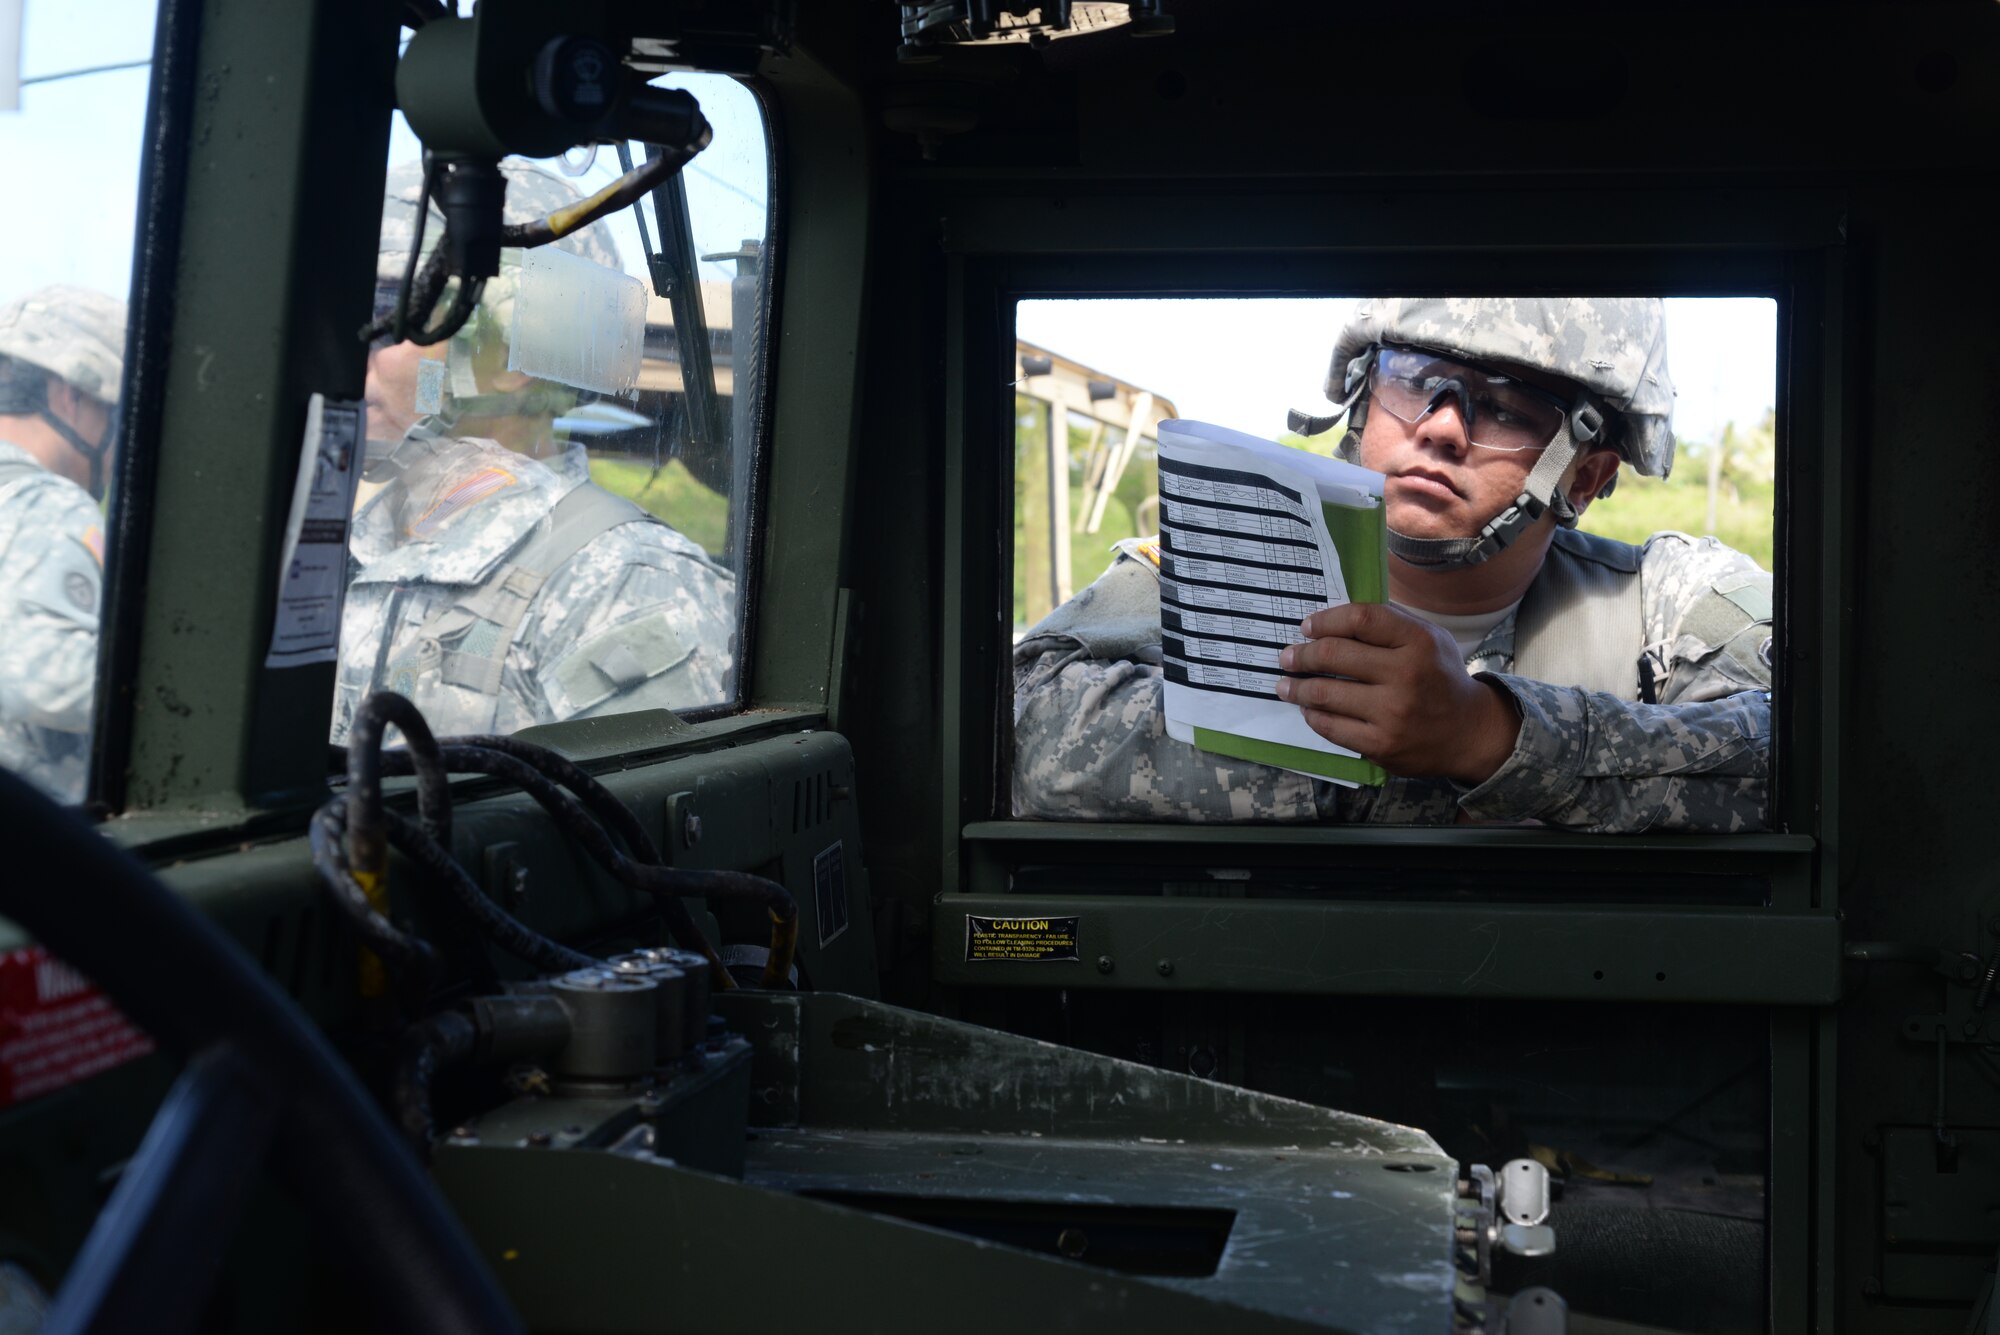 U.S. Army Reserve 1st Lt. George Sablan, 797th Engineer Company (Vertical) company commander, reviews a schedule while observing a training exercise June 11, 2014, on Andersen South, Guam. The training was held to improve the soldiers’ skills for contingencies in a variety of combat scenarios. (U.S. Air Force photo by Airman 1st Class Amanda Morris/Released)